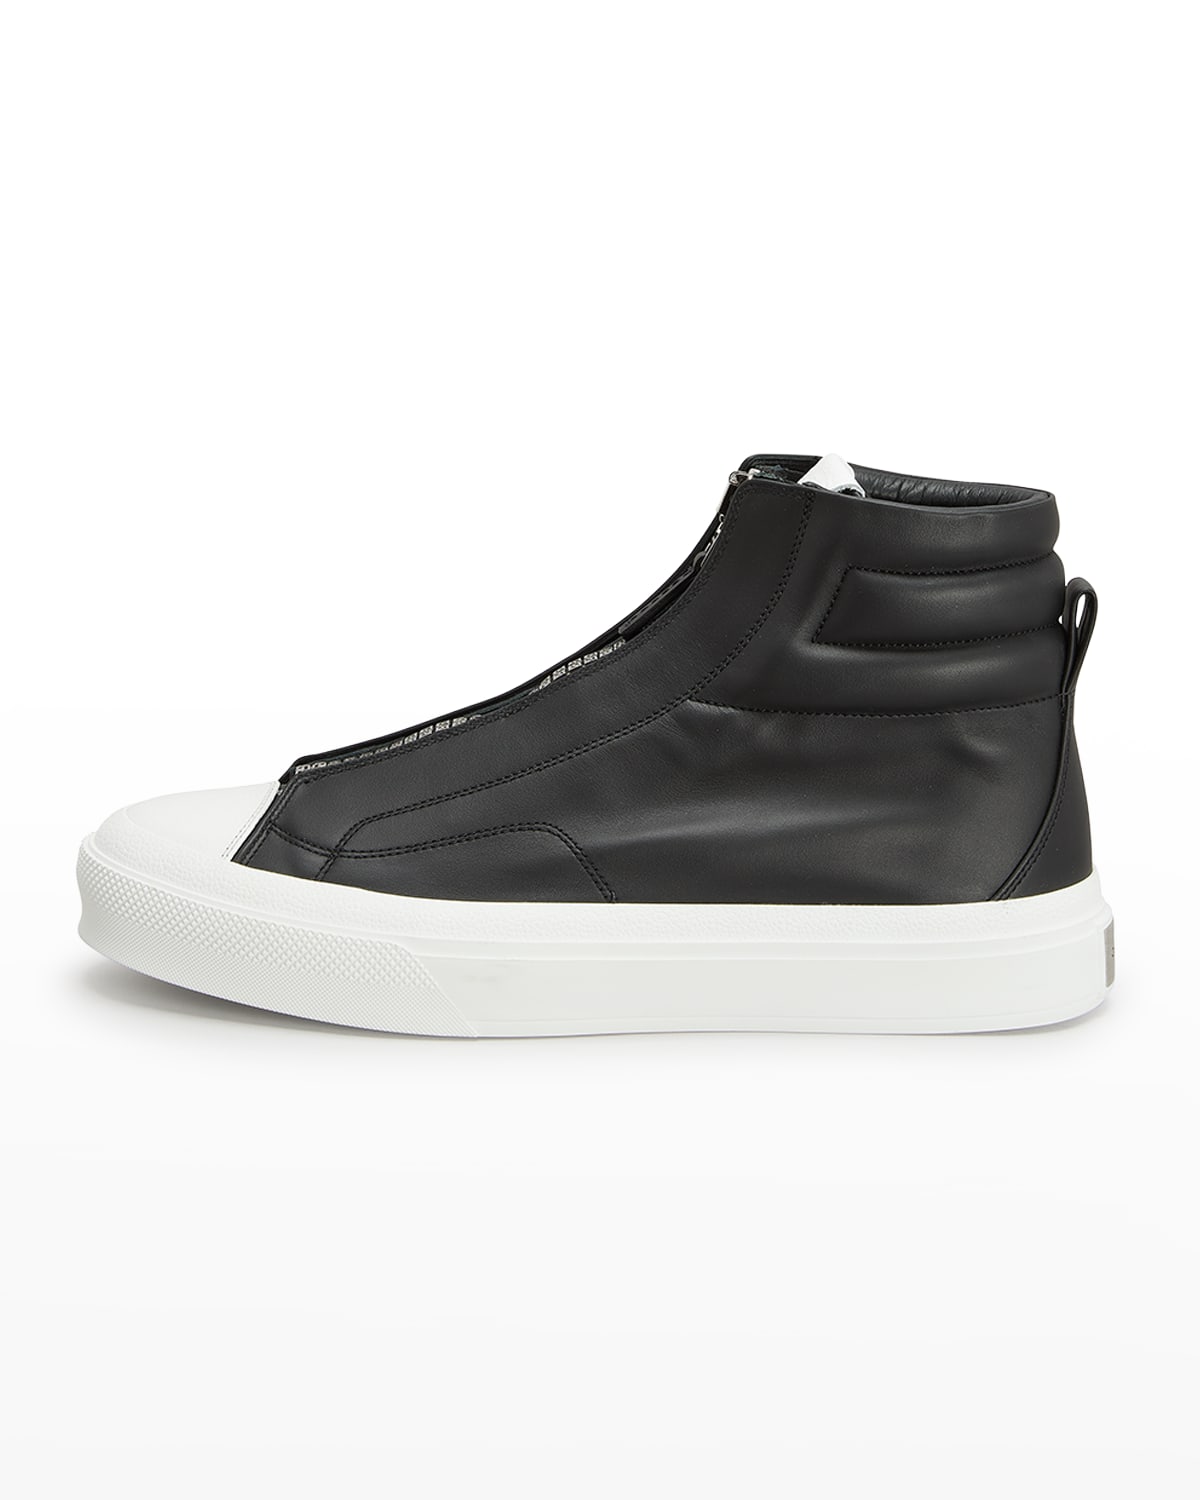 Givenchy Men's City 4G-Zip Leather High Top Sneakers